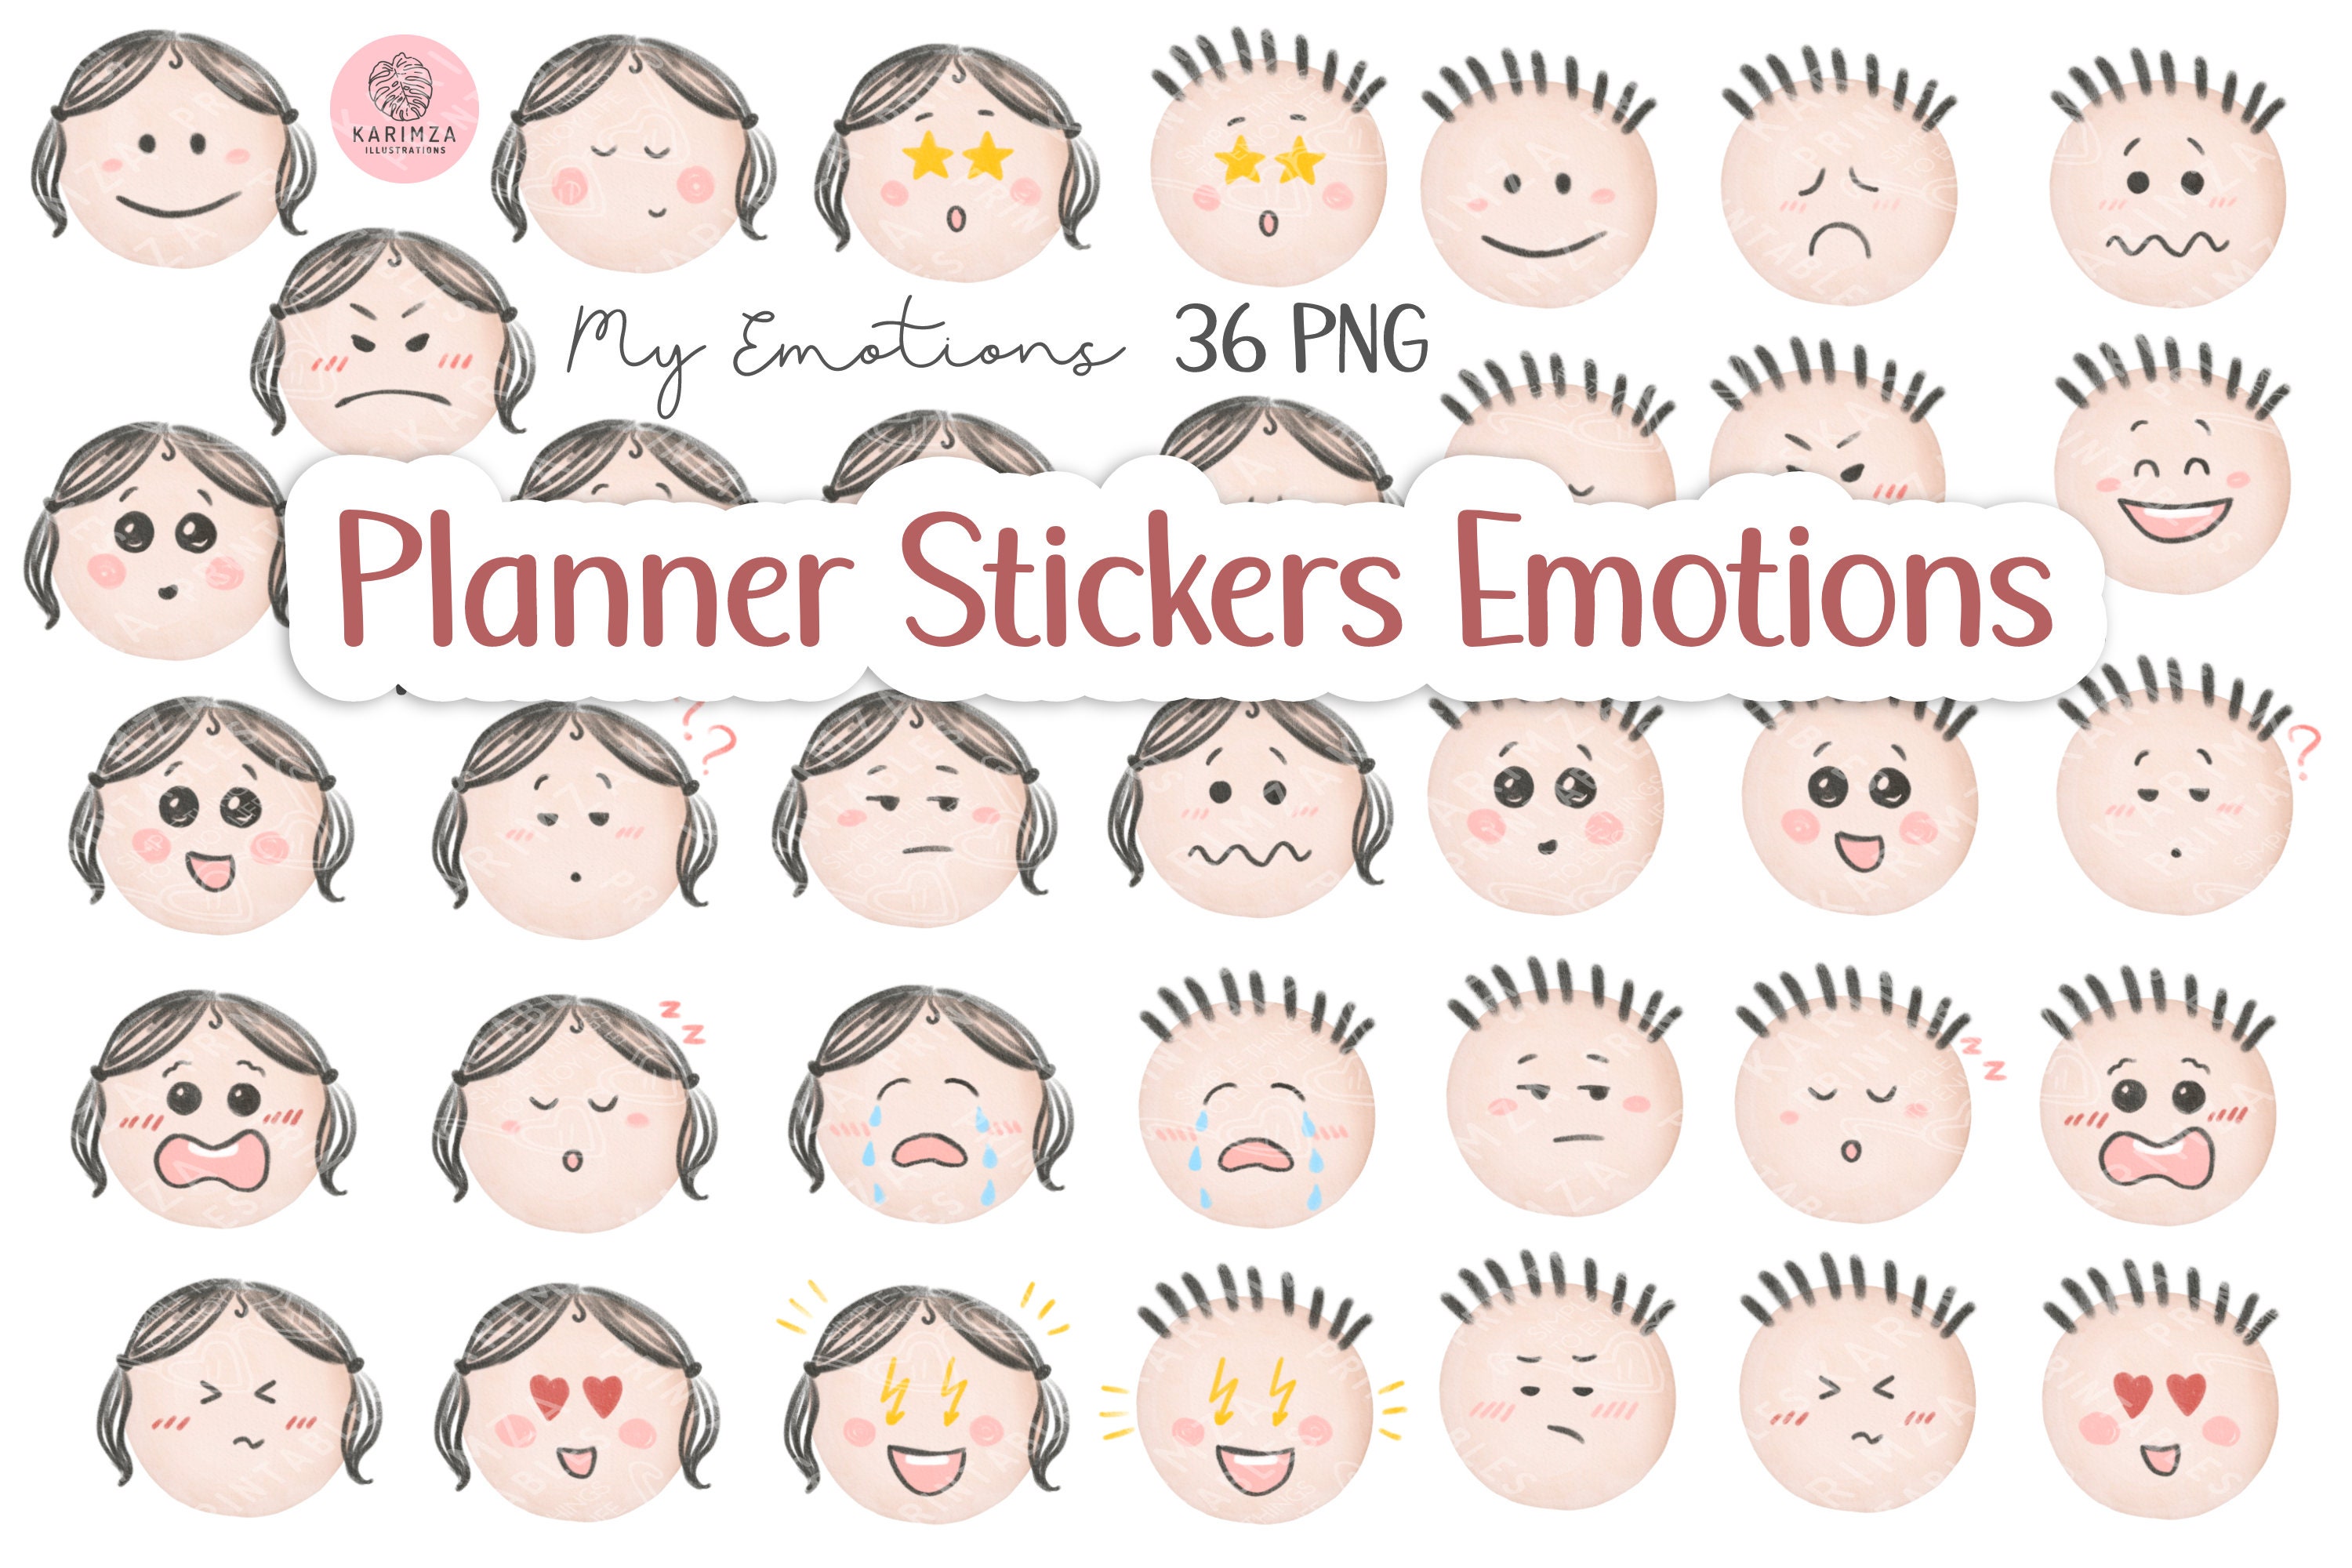 Doodle Emoji. Doodles Image Pictogram, Smile Emotion Funny Face, Happy Fun  Emoticon Line Icon, Sad Hand Drawn, Neat Outline Isolated Vector  Illustration. Illustration Of Emotion Face Expression Royalty Free SVG,  Cliparts, Vectors